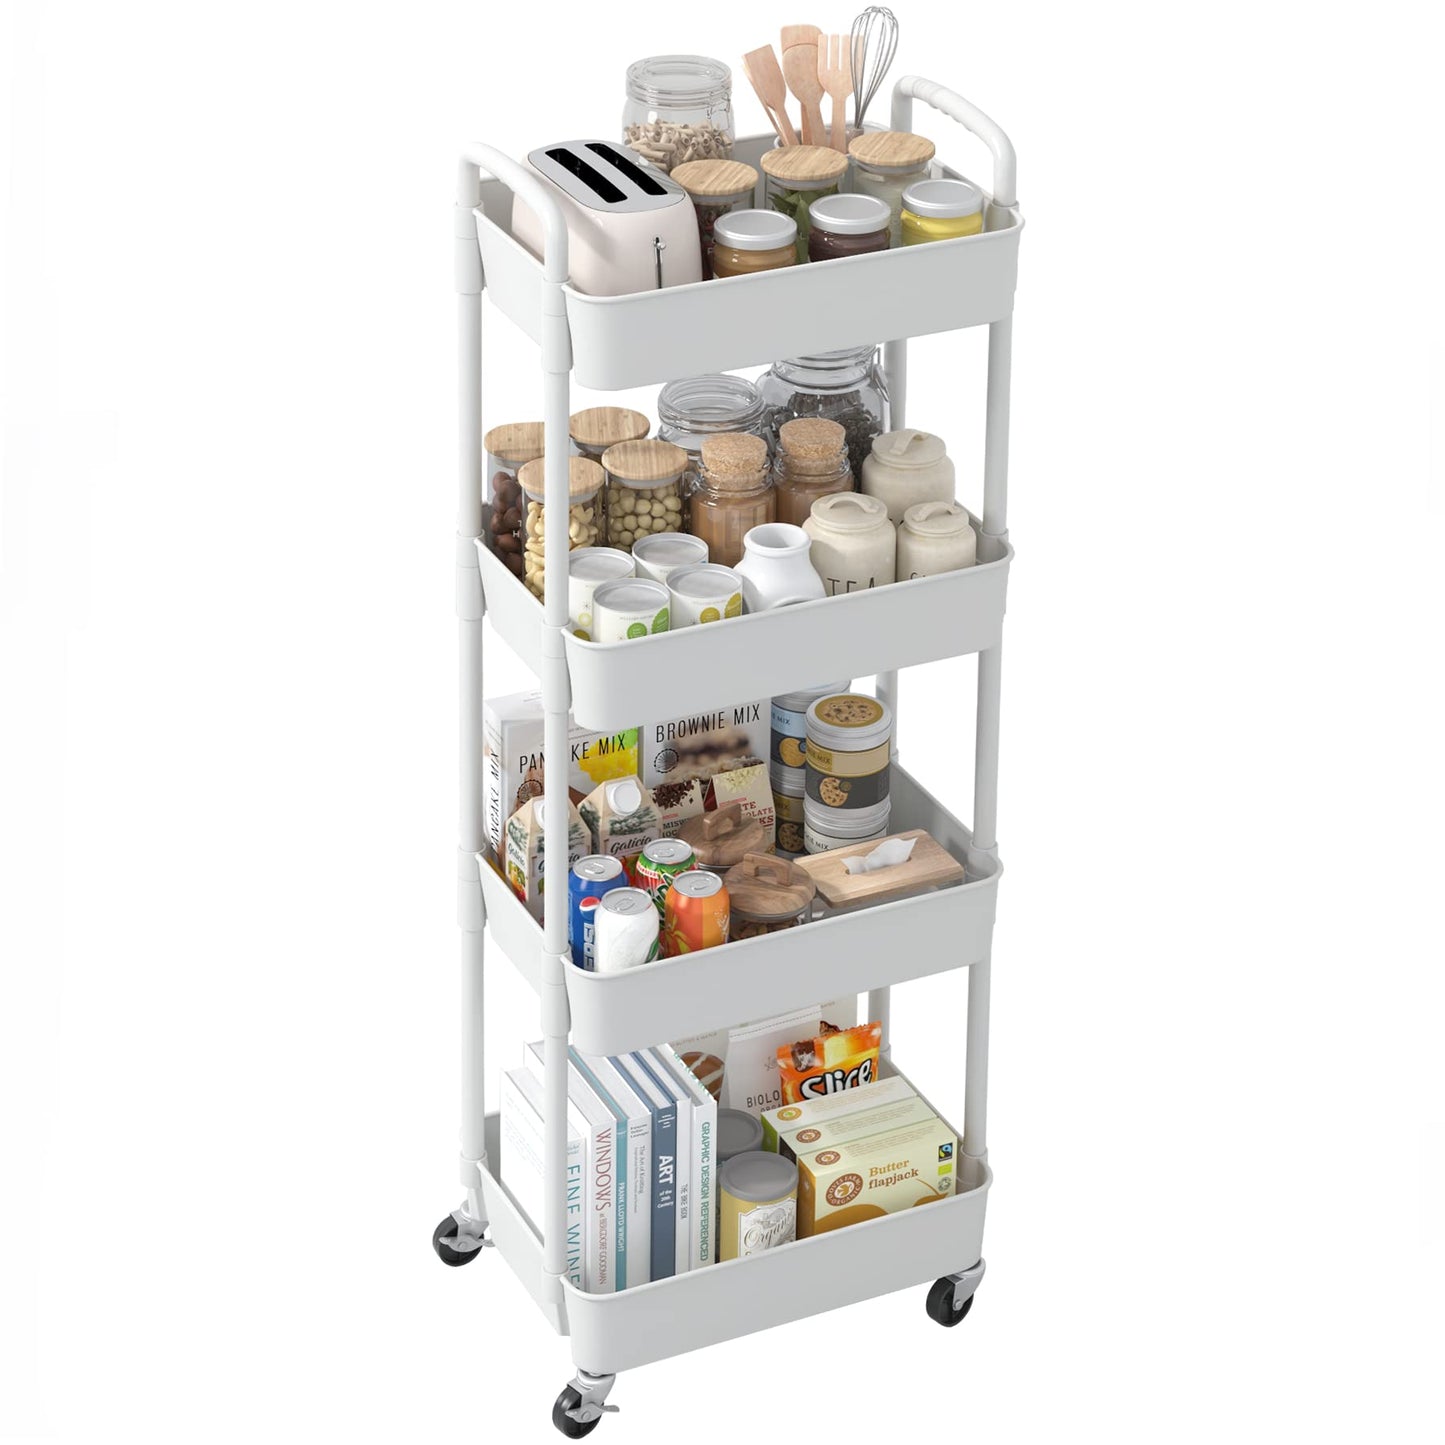 Sywhitta 4-Tier Plastic Rolling Utility Cart with Handle, Multi-Functional Storage Trolley for Office, Living Room, Kitchen, Movable Storage Organizer with Wheels, White